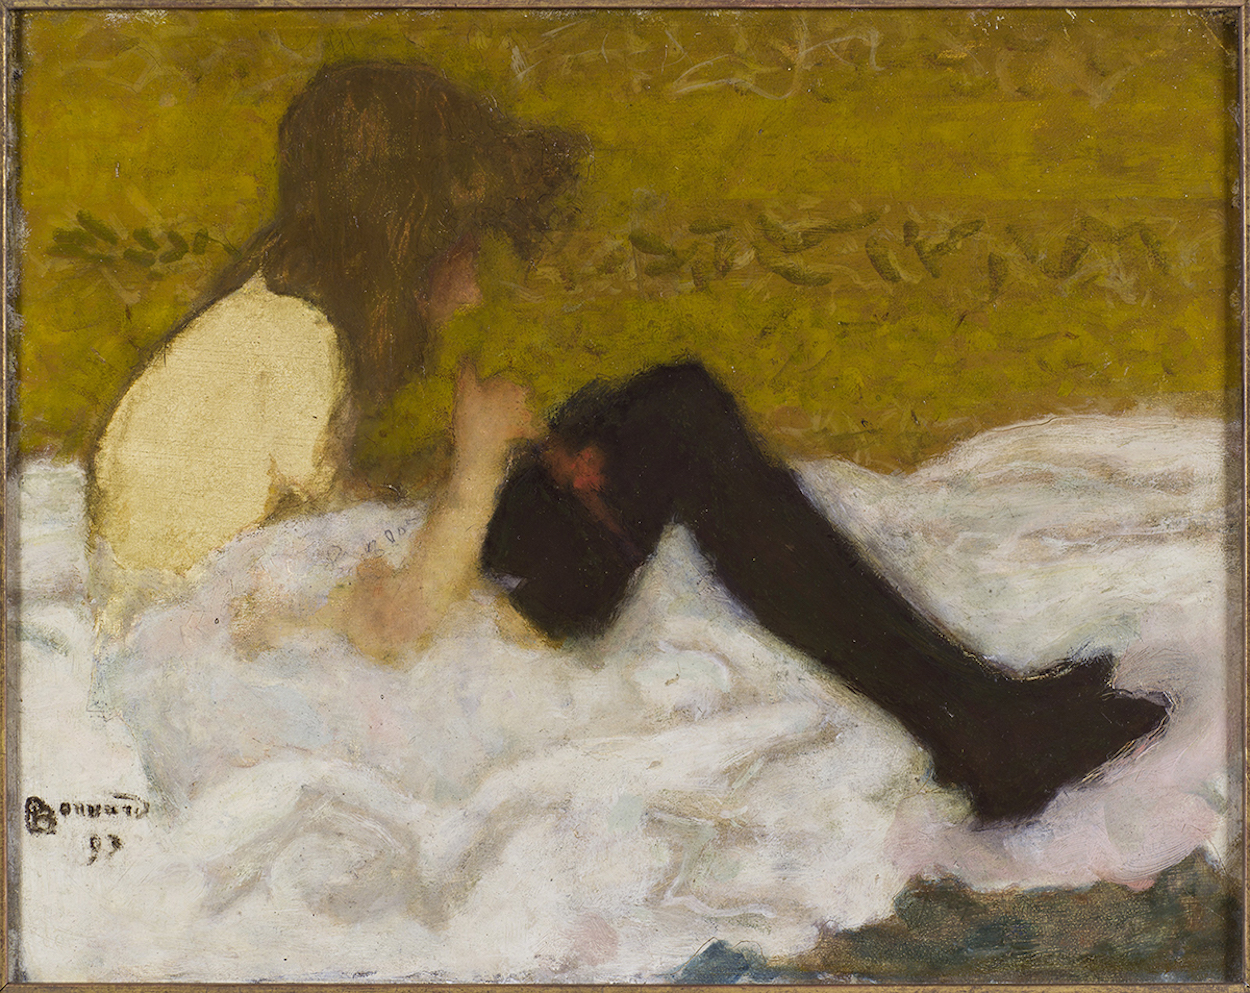 Young Woman in Black Stockings by Pierre Bonnard - 1893 Musée Bonnard